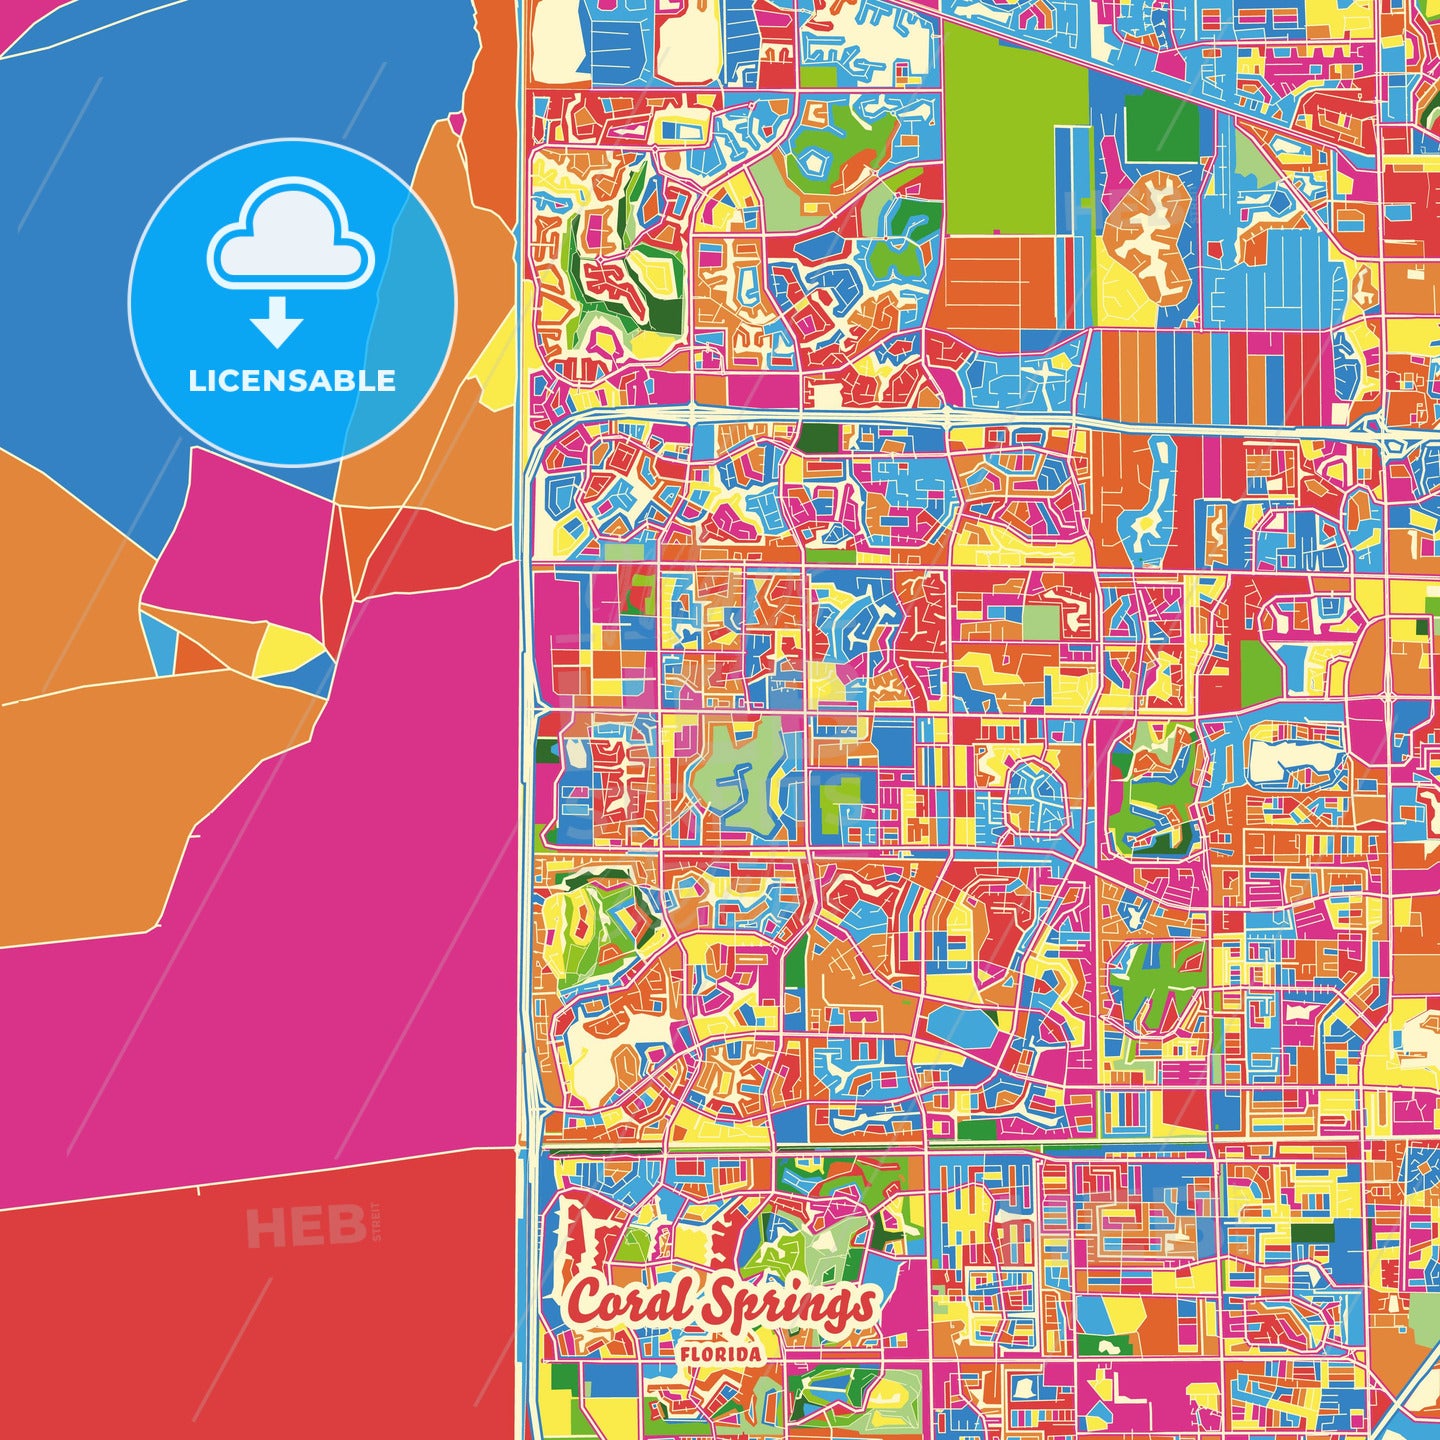 Coral Springs, United States Crazy Colorful Street Map Poster Template - HEBSTREITS Sketches